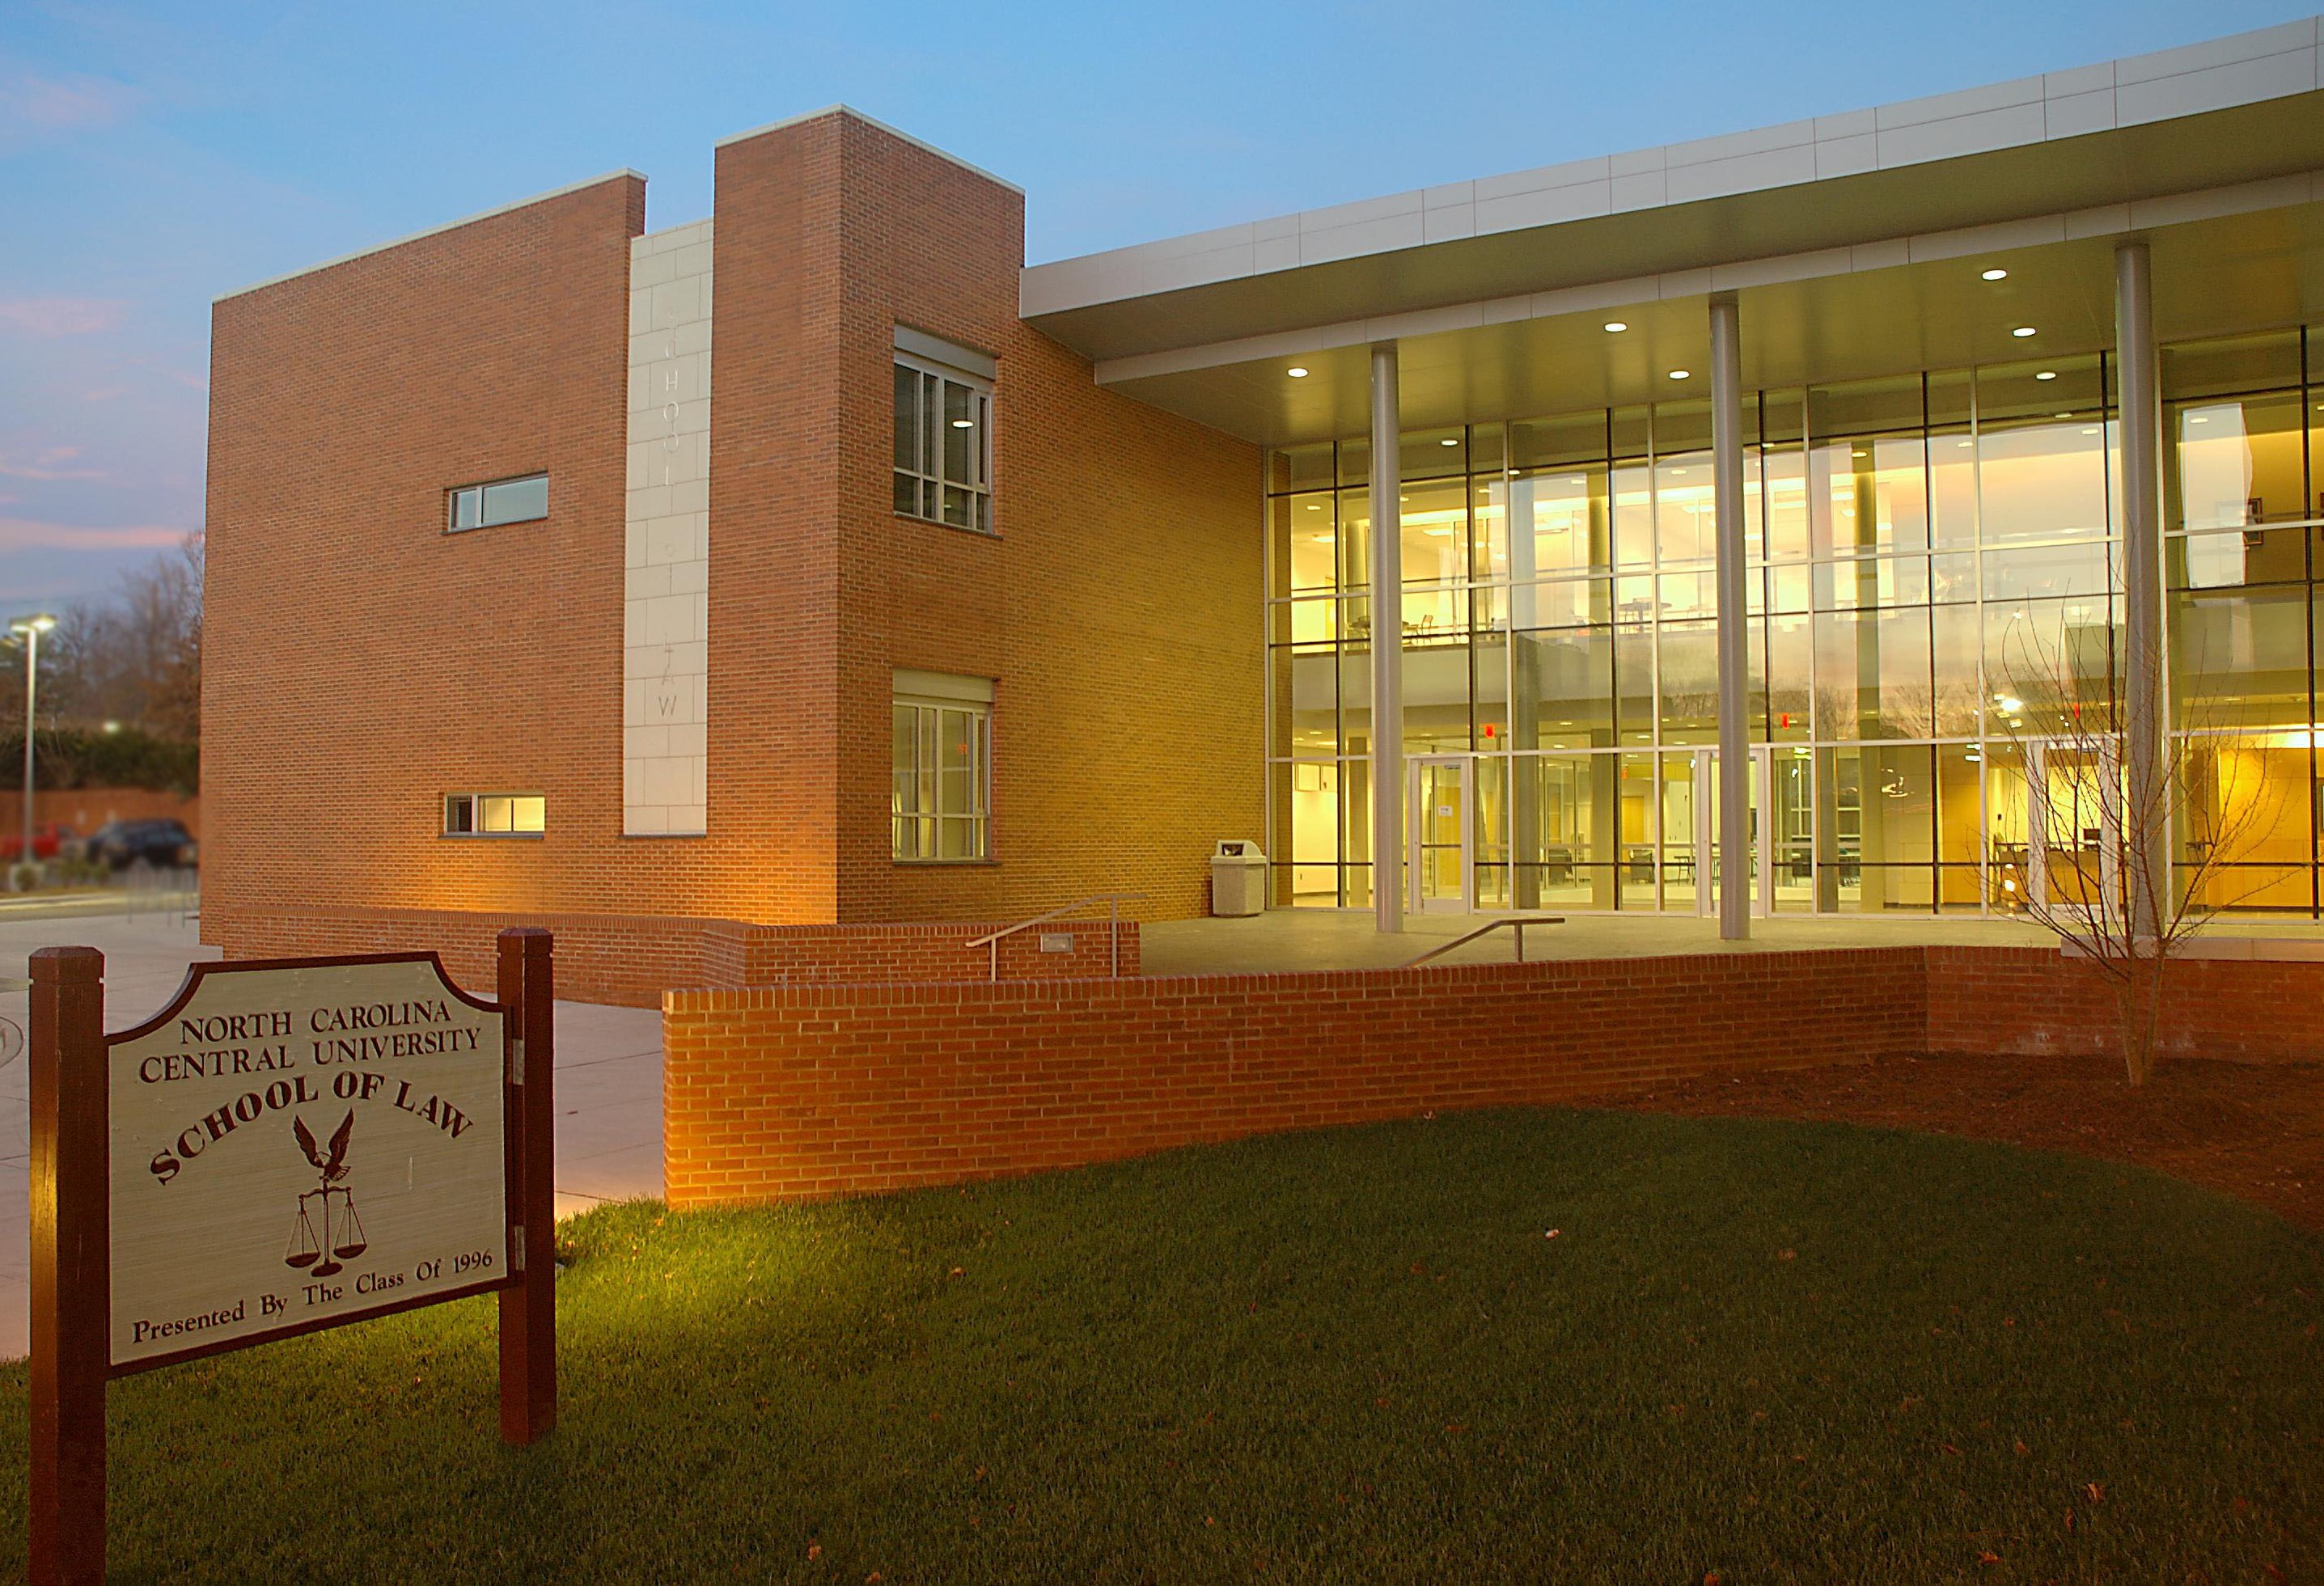 Patent quality discussion series at NCCU School of Law